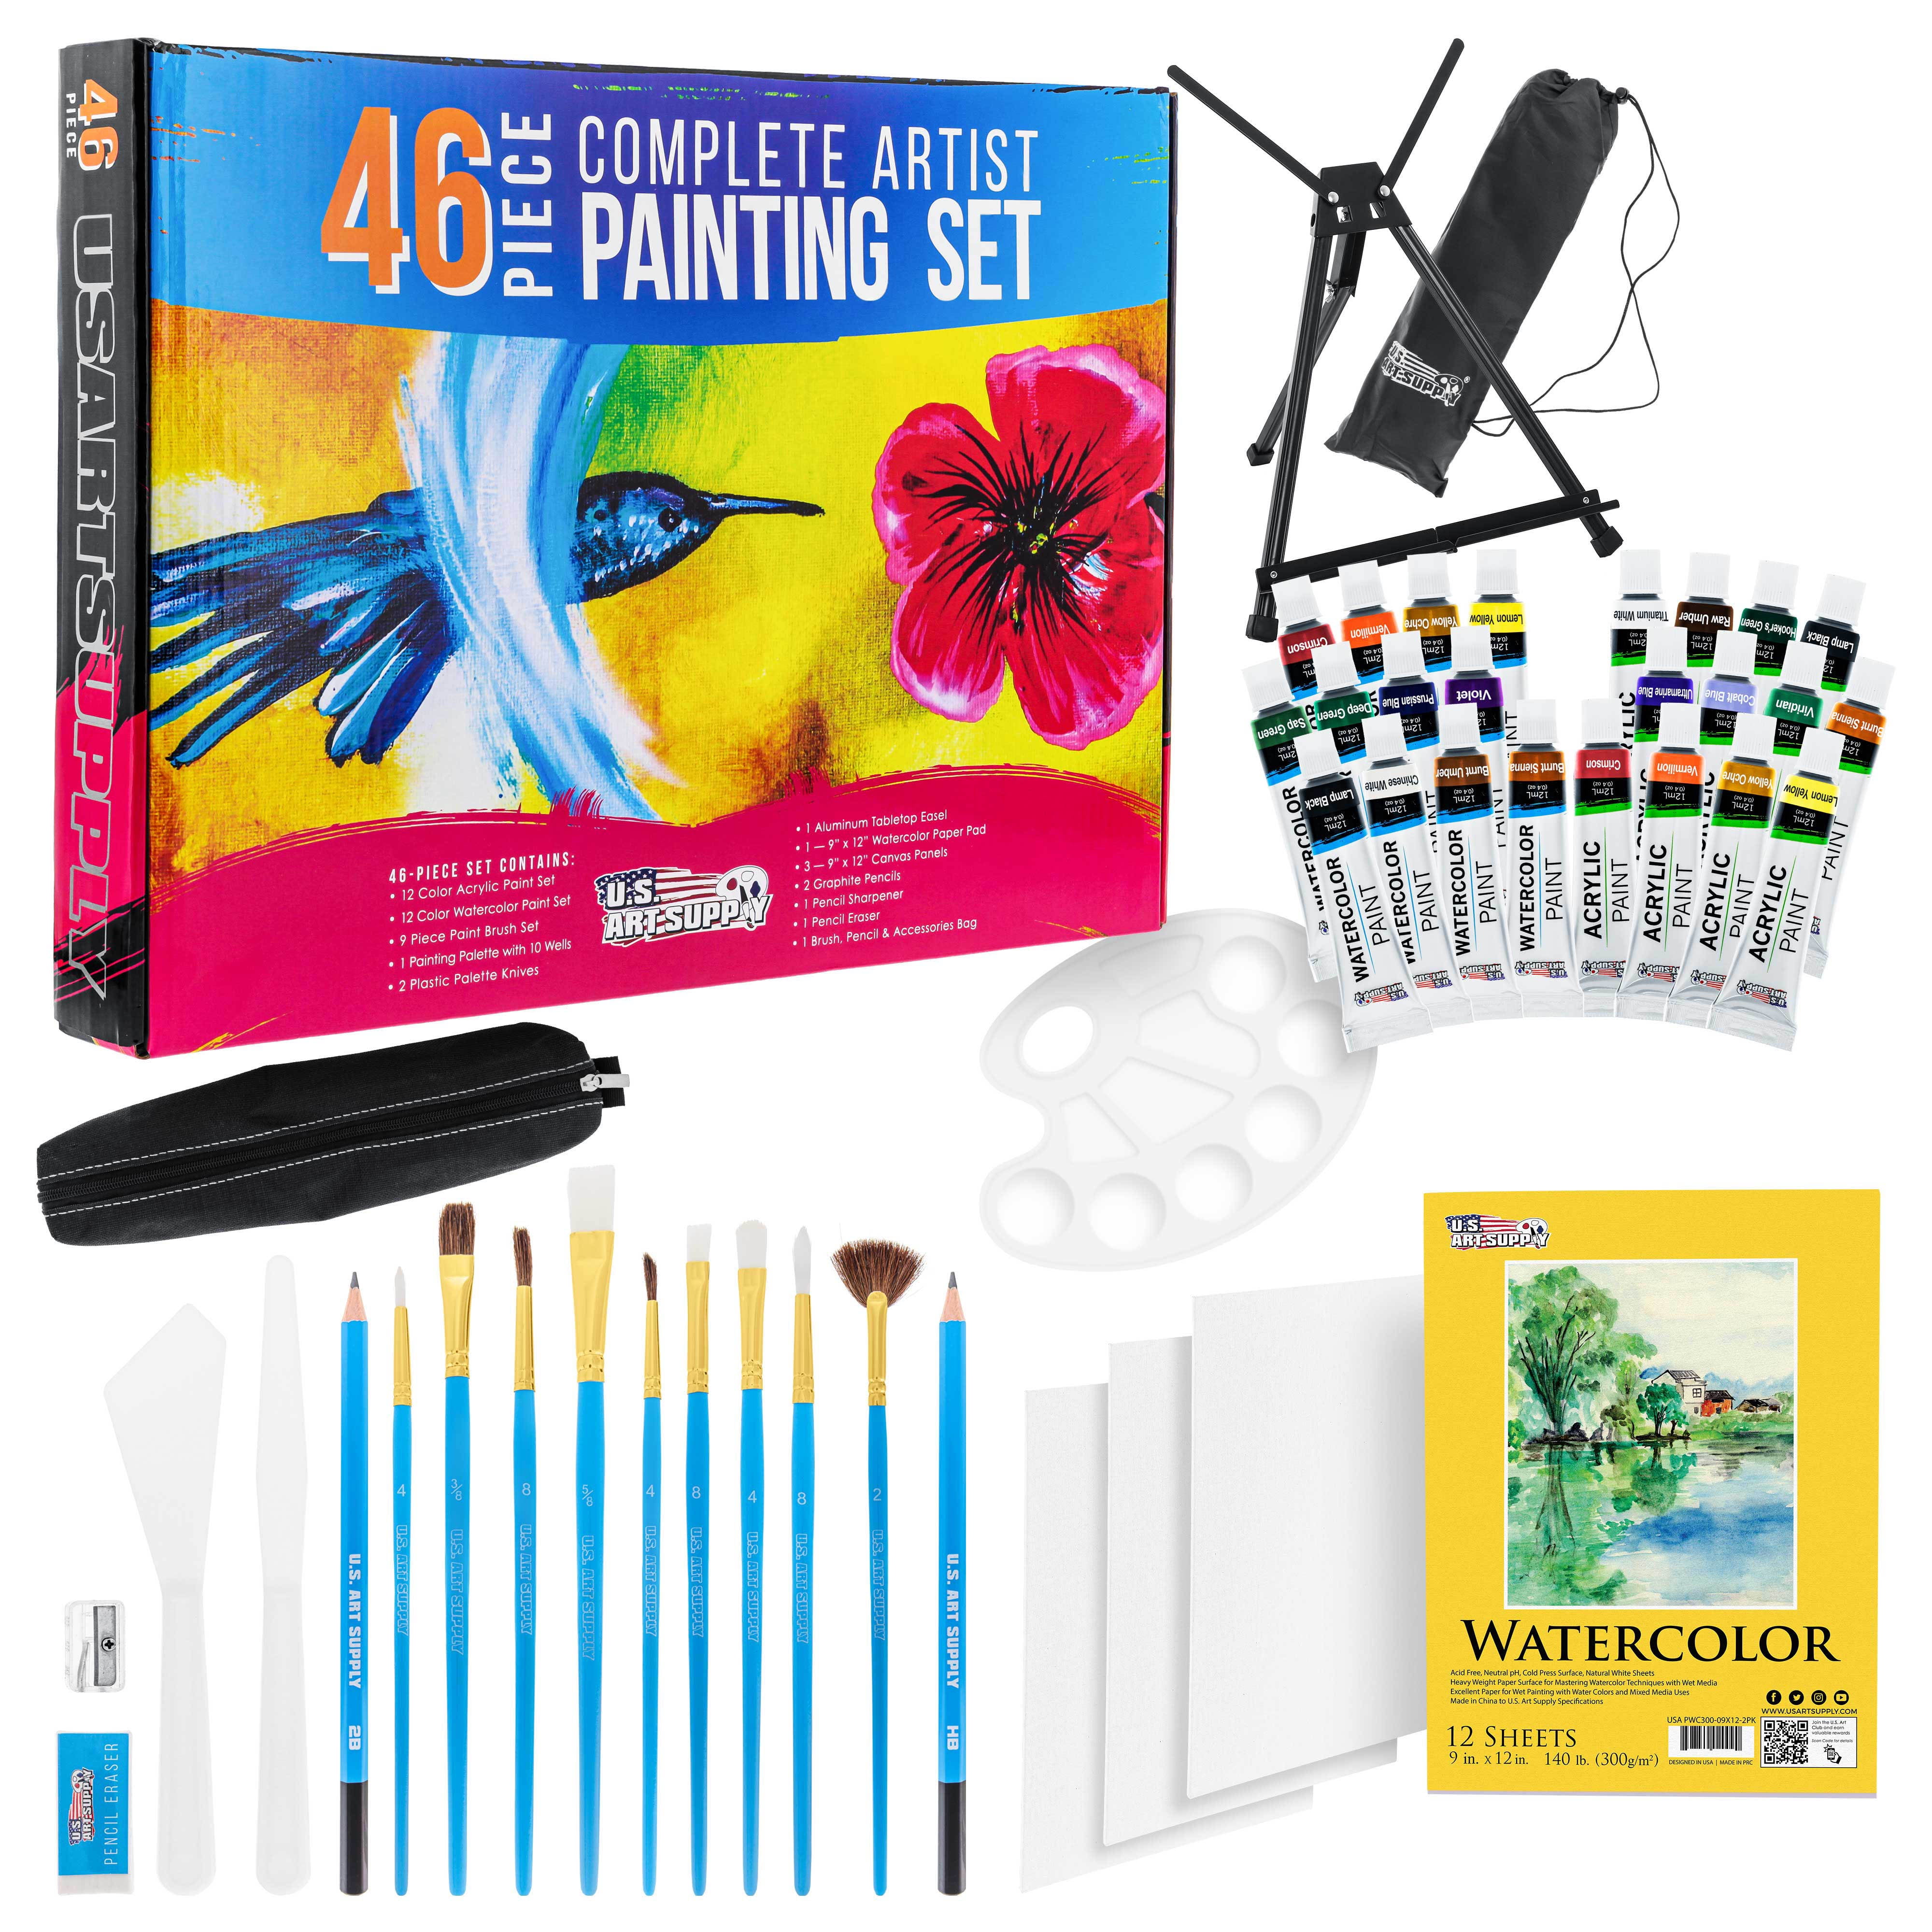 170 Pcs Artist Painting Set, Shuttle Art Deluxe Art Set with Paint,  Aluminum and Wooden Easels, Canvas, Paper Pads, Brushes and Other Art  Supplies, Complete Painting Kit for Adults, Kids and Artists 